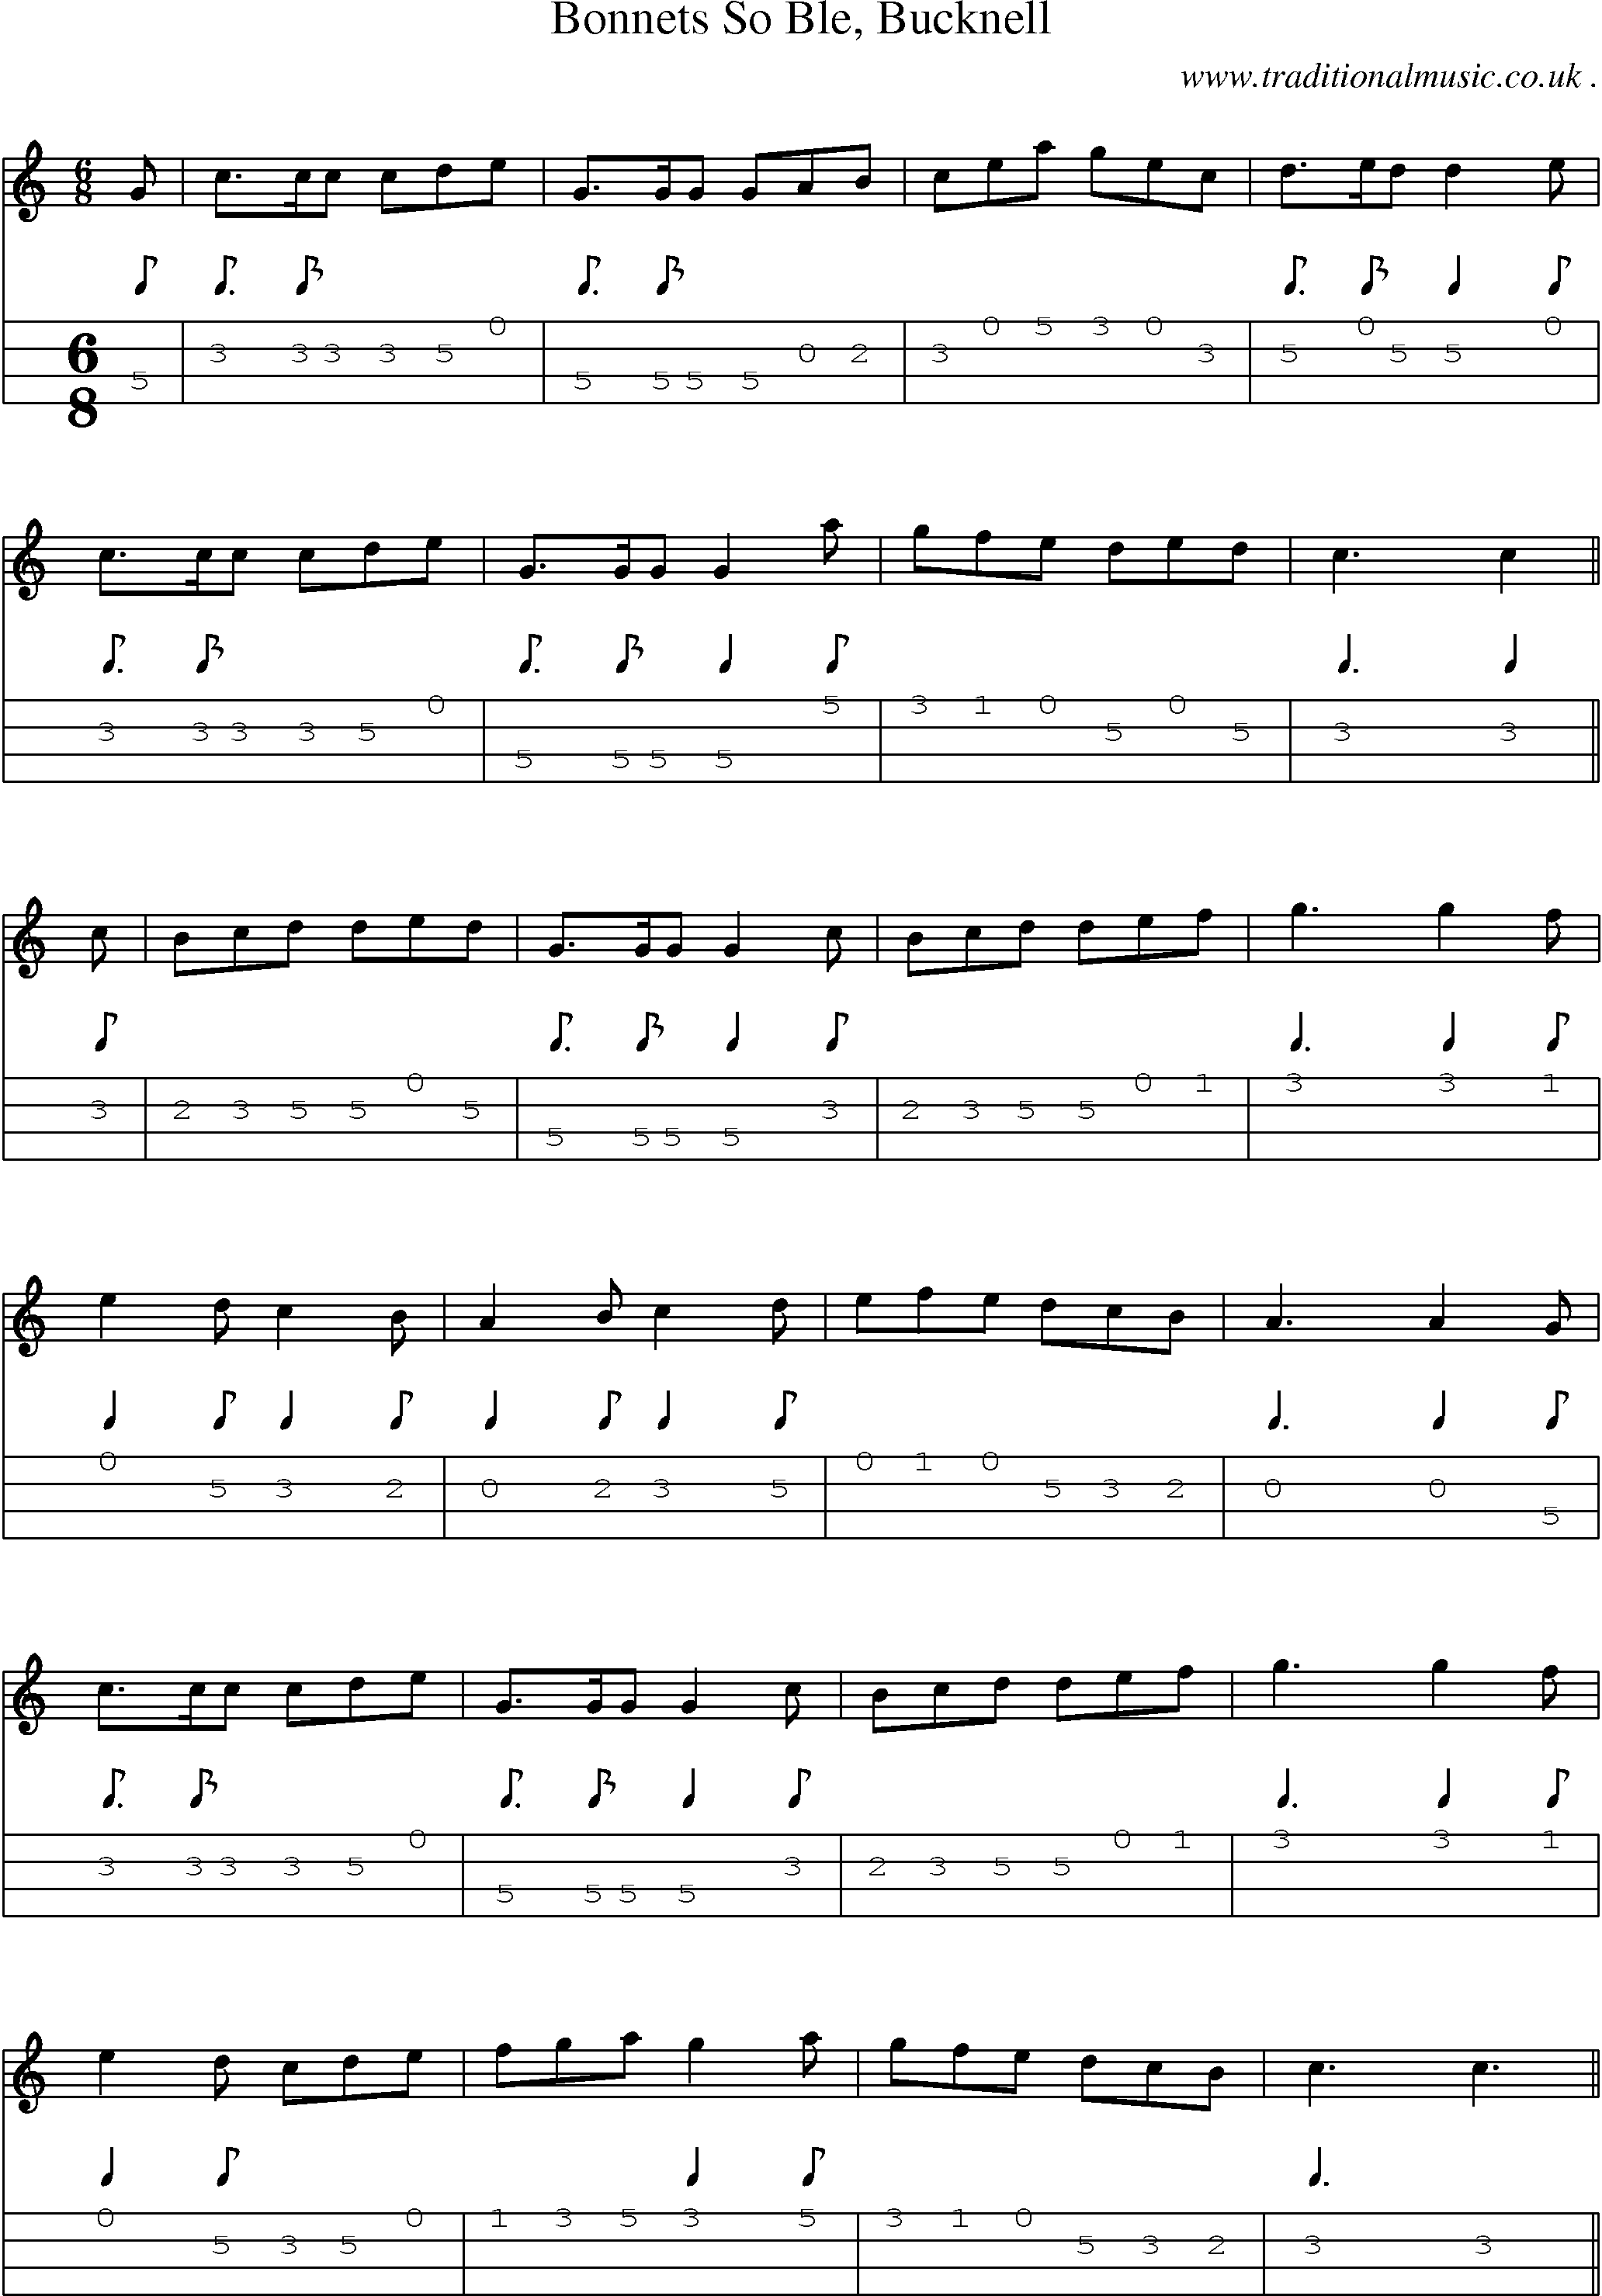 Sheet-Music and Mandolin Tabs for Bonnets So Ble Bucknell